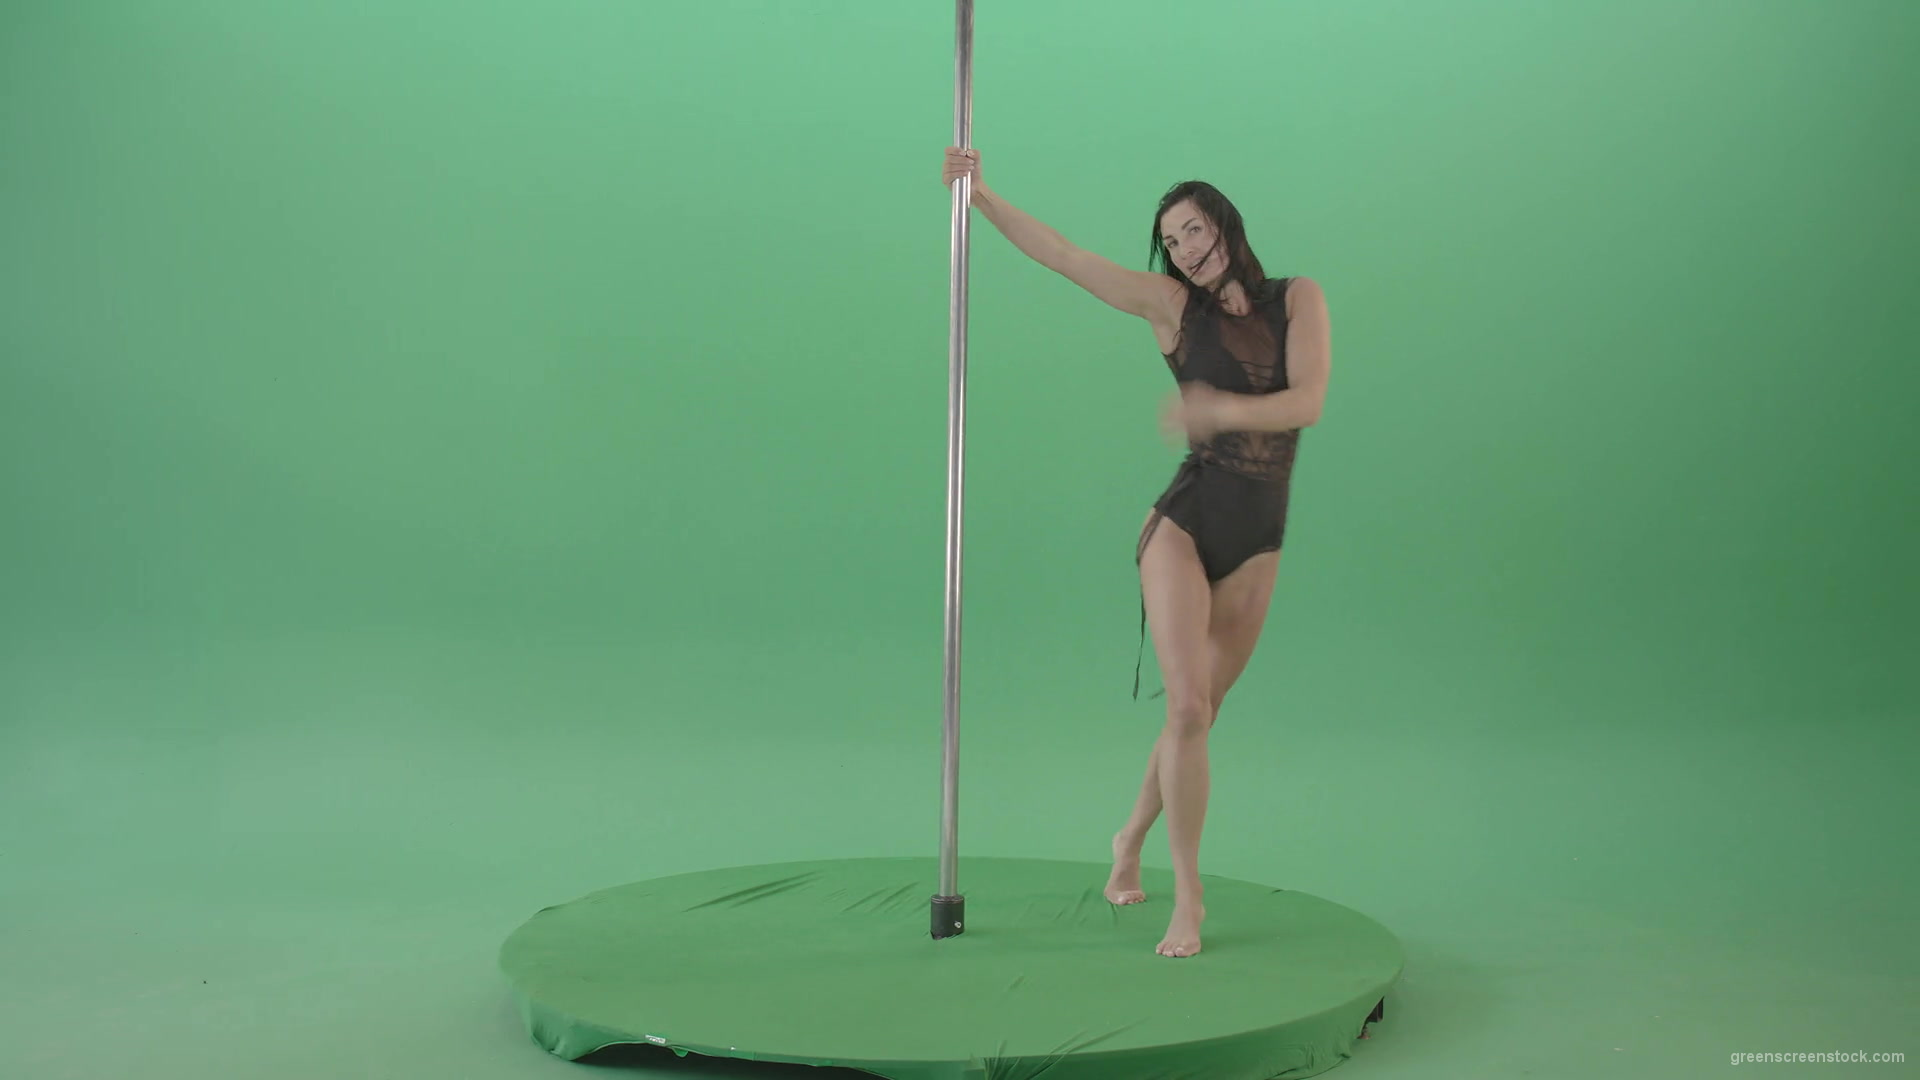 Sexy-girl-in-Lingerie-wear-dancing-strip-pole-dance-isolated-on-green-screen-4K-Video-Footage-1920_007 Green Screen Stock